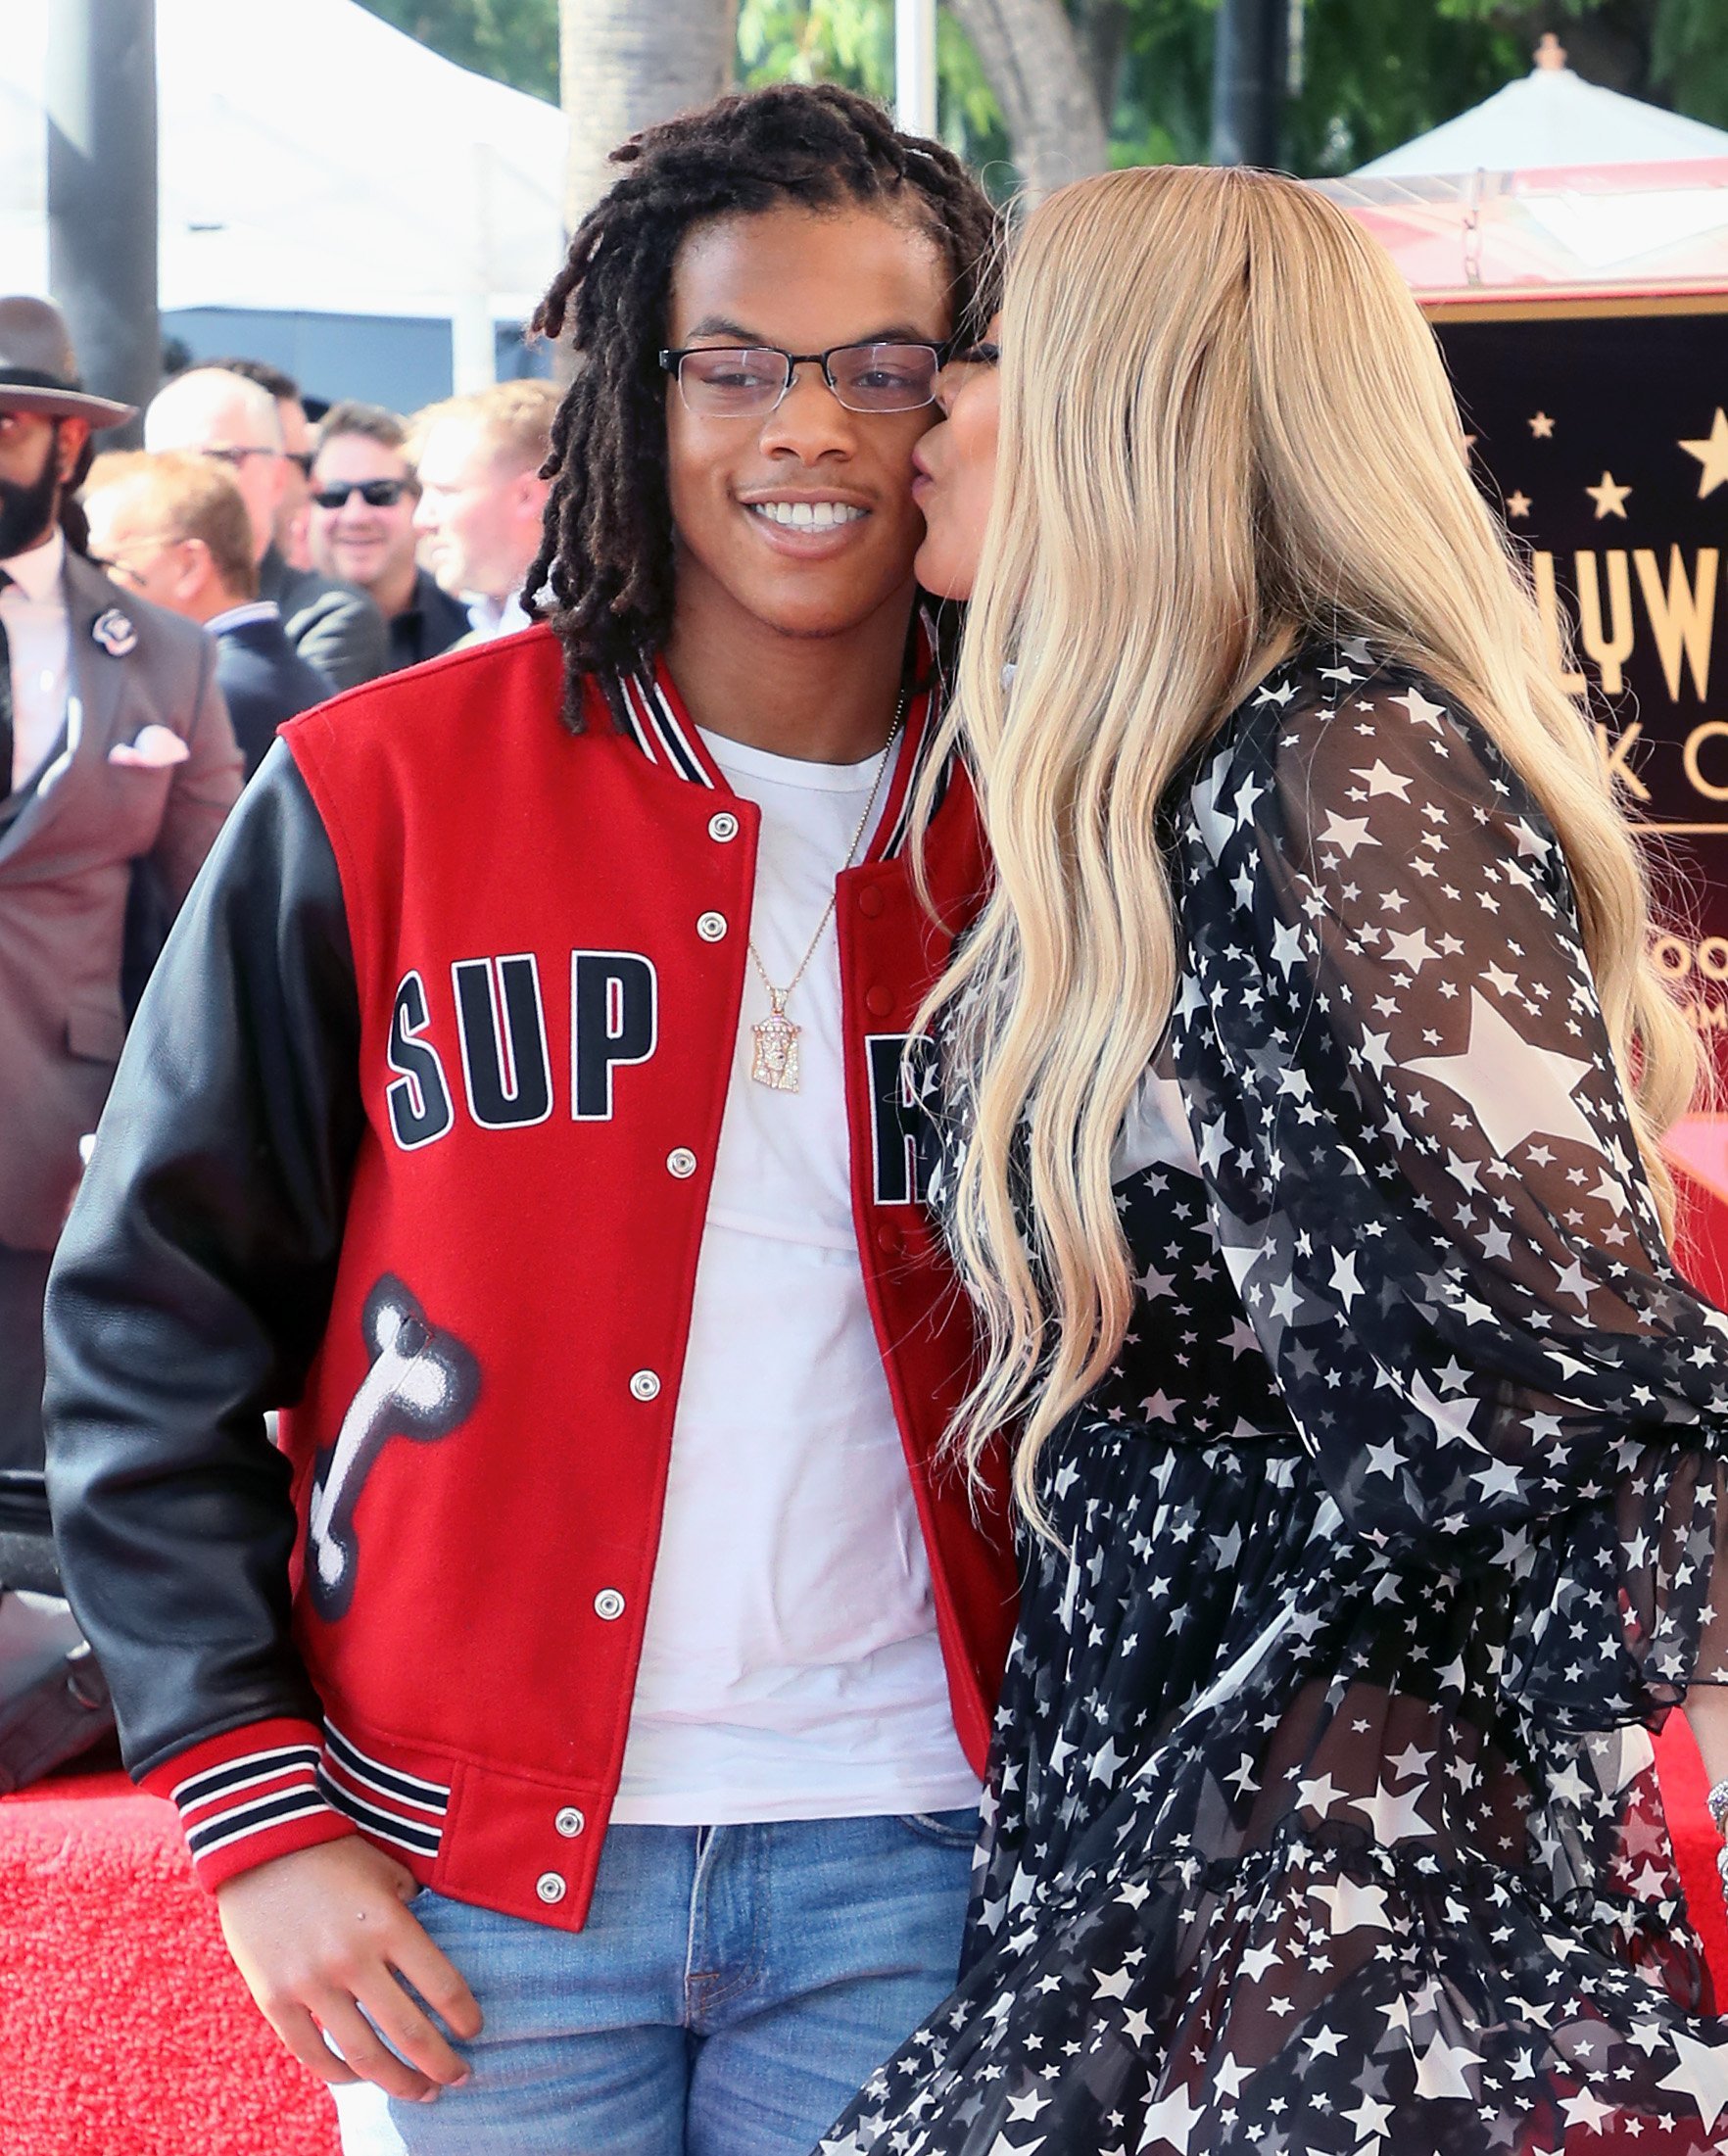 Wendy Williams & Kevin Hunter Jr. as Williams is honored with a Star on the Hollywood Walk of Fame on Oct. 17, 2019 in Hollywood, California | Photo: Getty Images